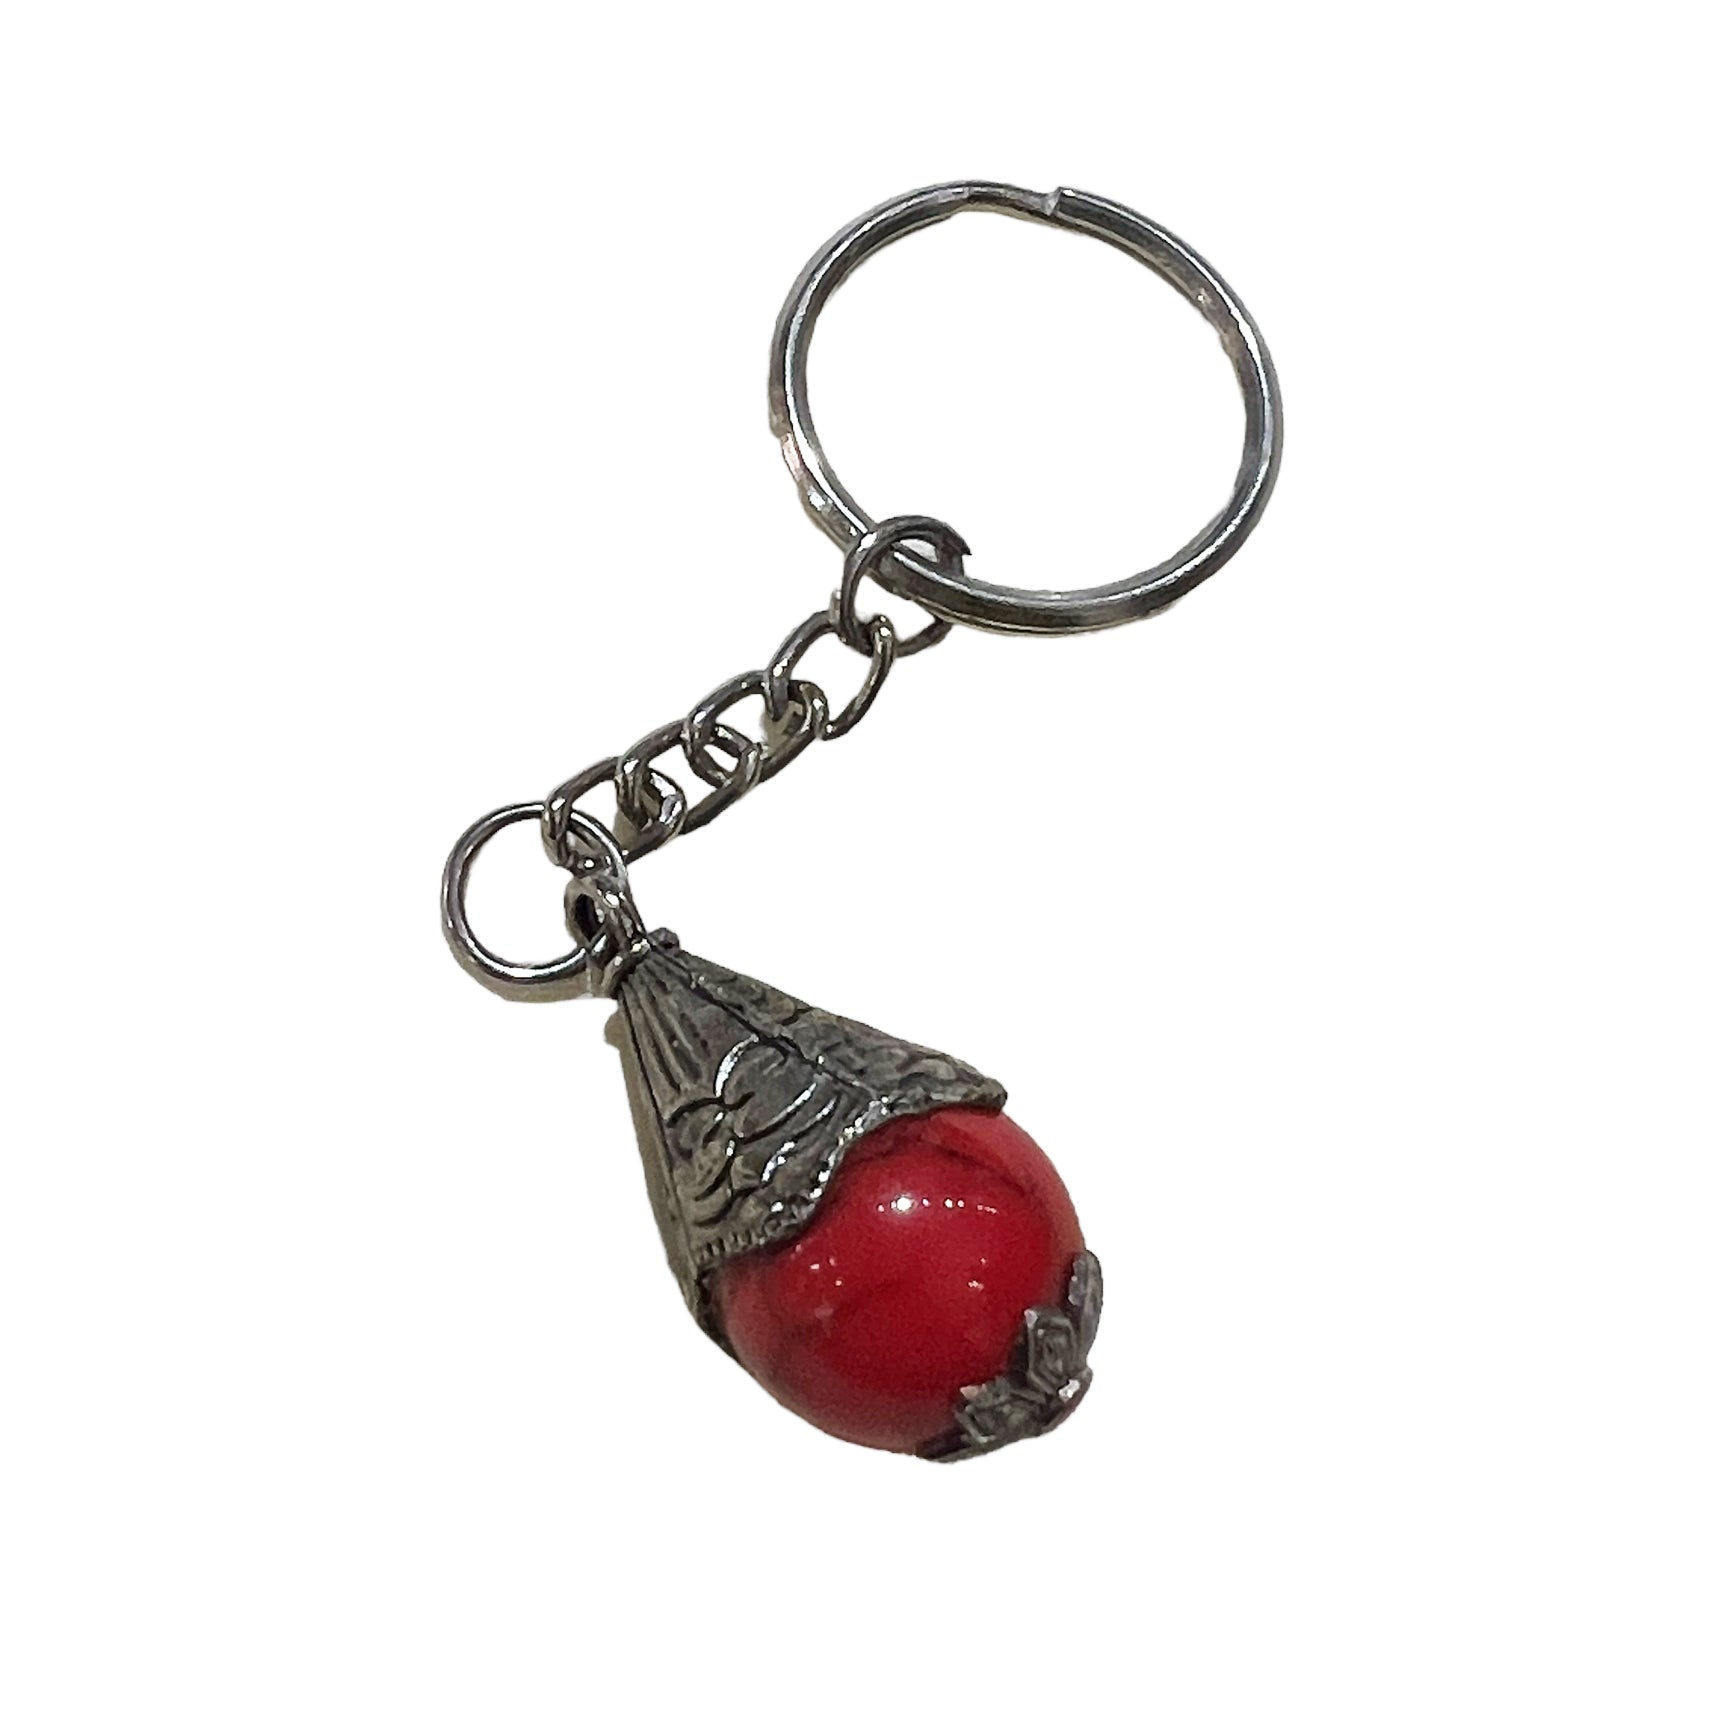 Colored Bead Key Chain - Vintage India NYC